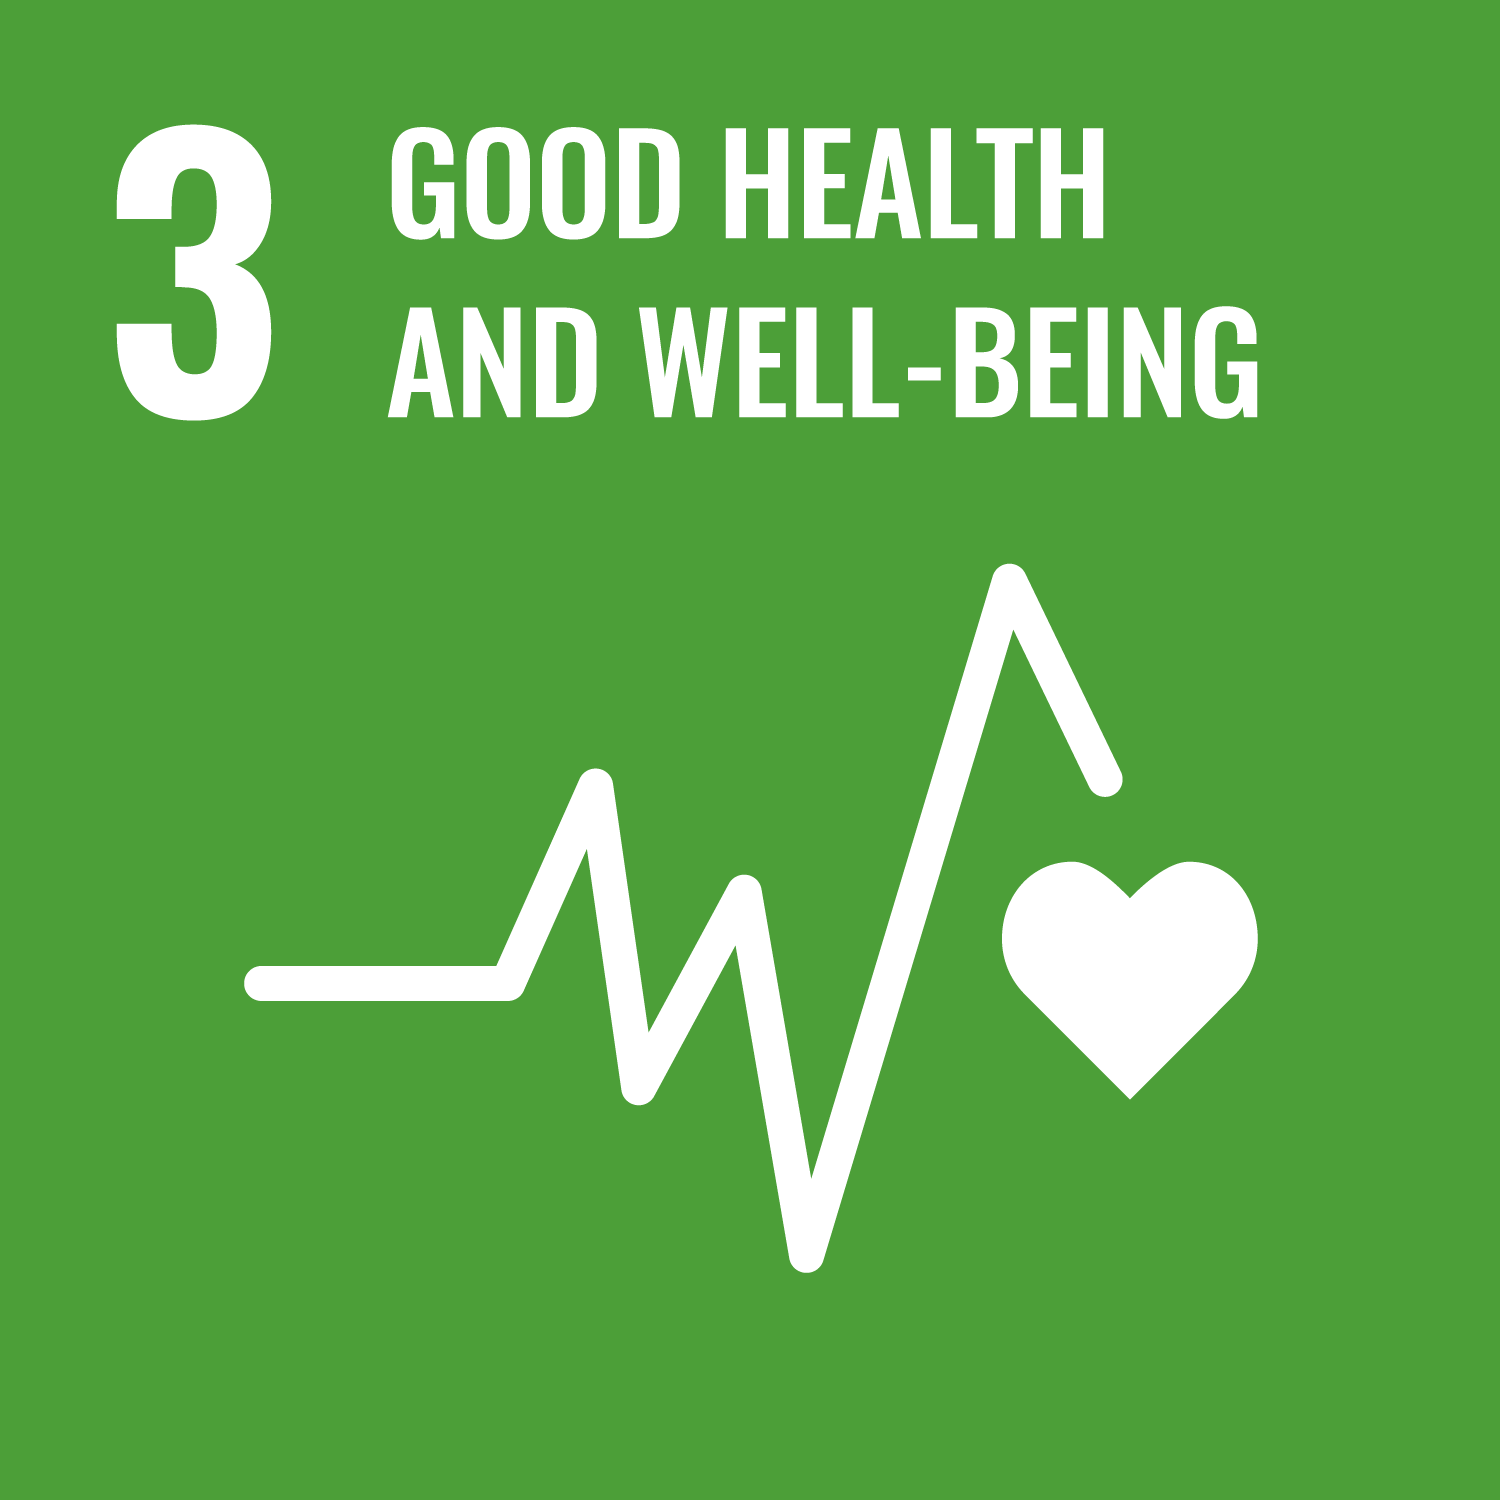 White lettering on a dark green background: 3 Good health and well-being, below a pictogram of a heartbeat line and a heart